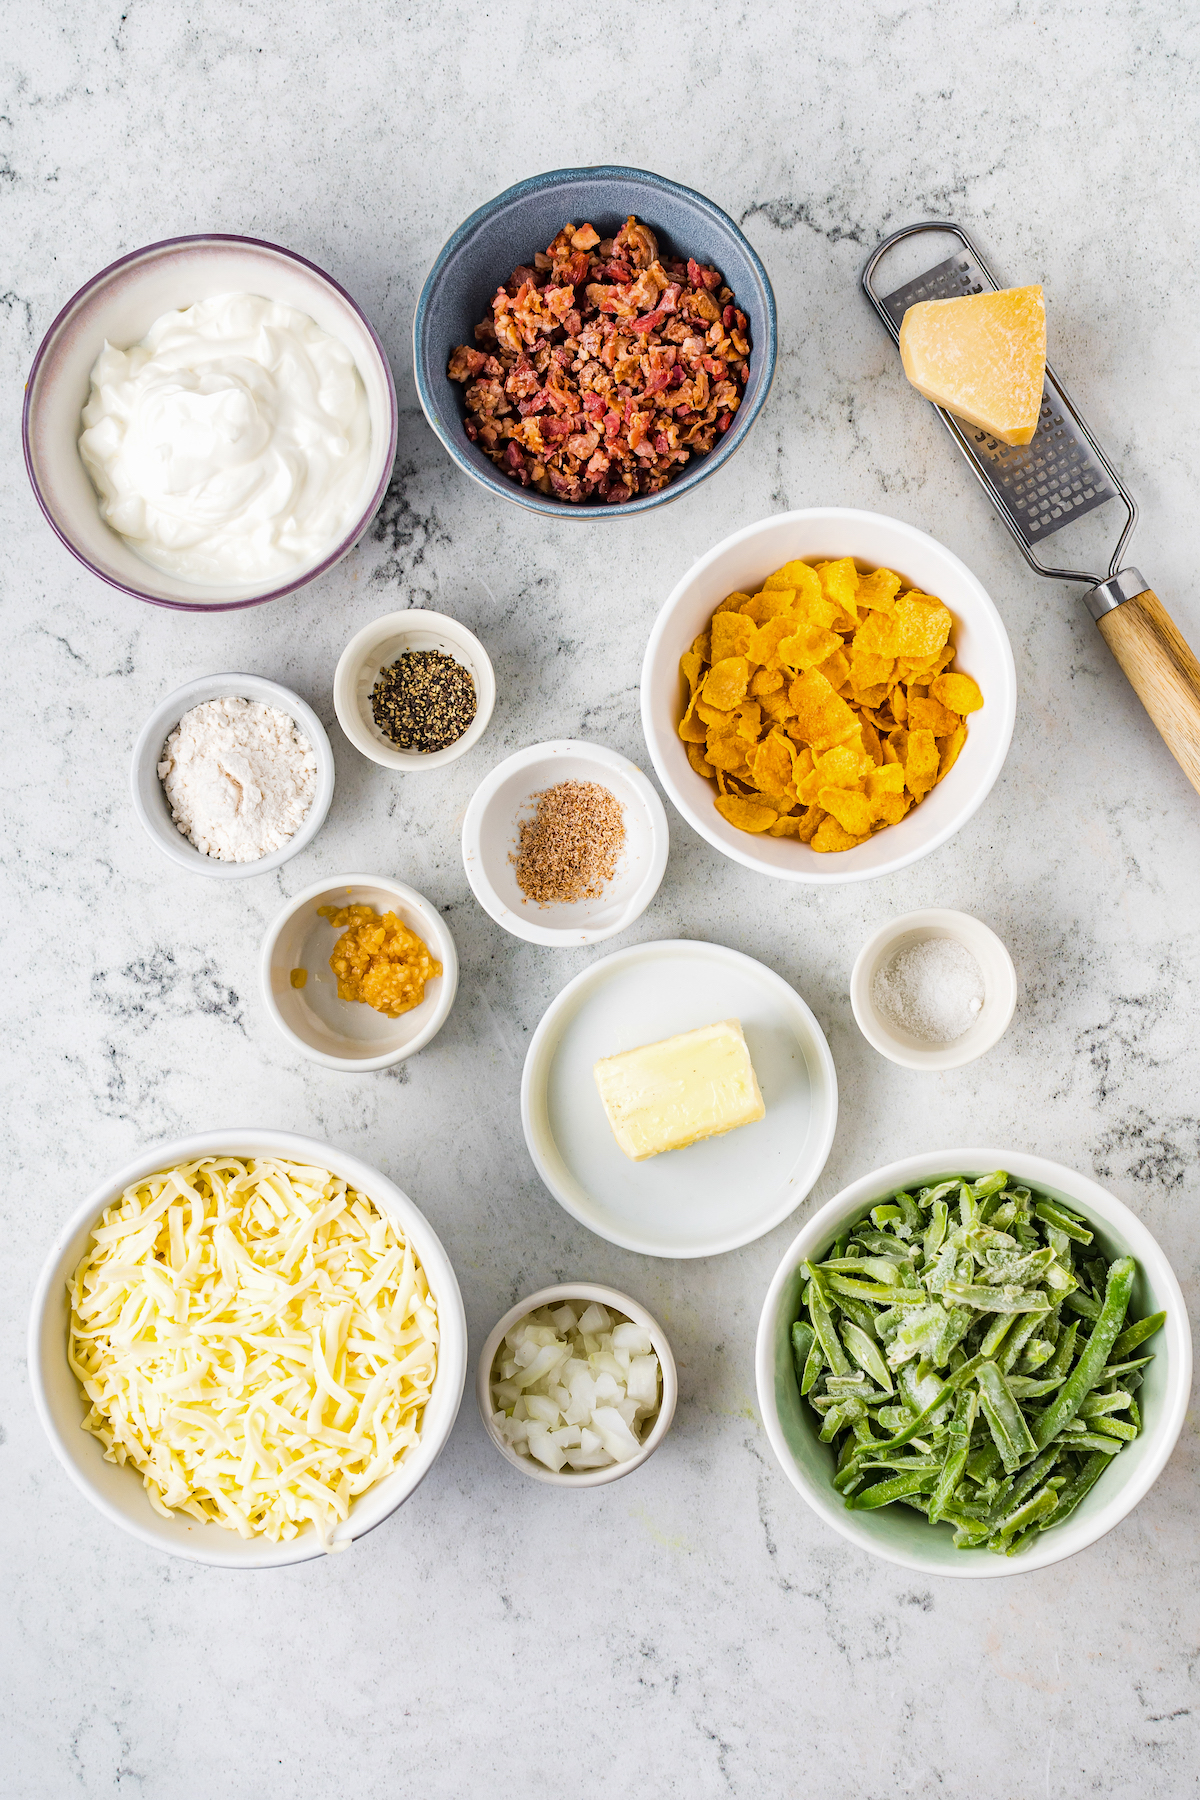 From top left: Sour cream, bacon bits, Parmesan cheese, flour, pepper, nutmeg, cornflakes, garlic, butter, salt, shredded cheese, diced onion, frozen green beans.